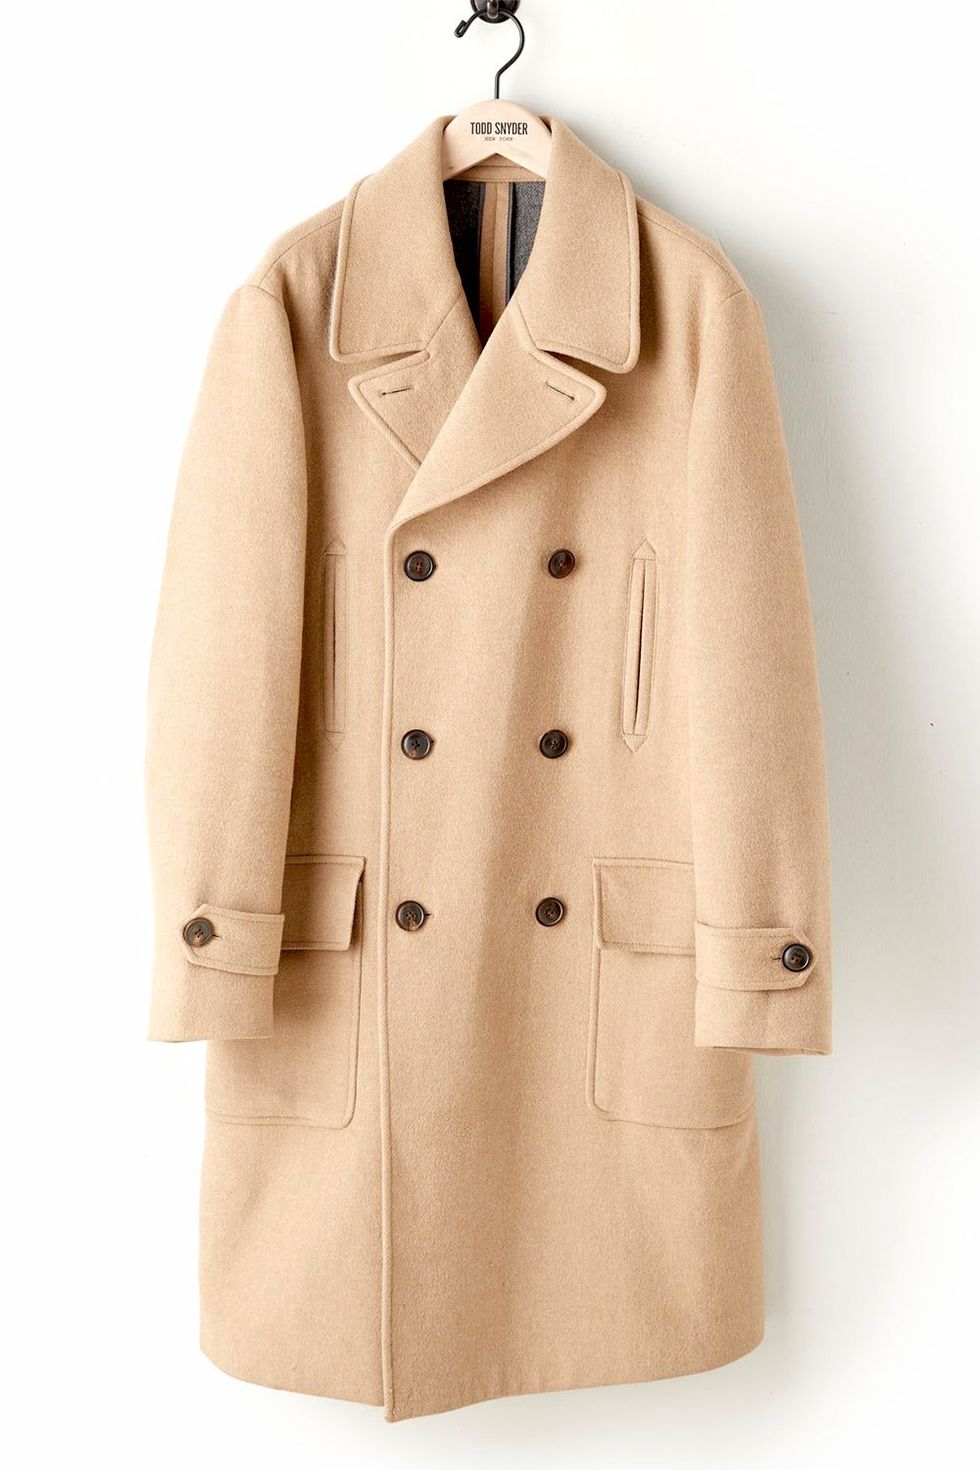 Italian Wool Double Breasted Officer Topcoat 